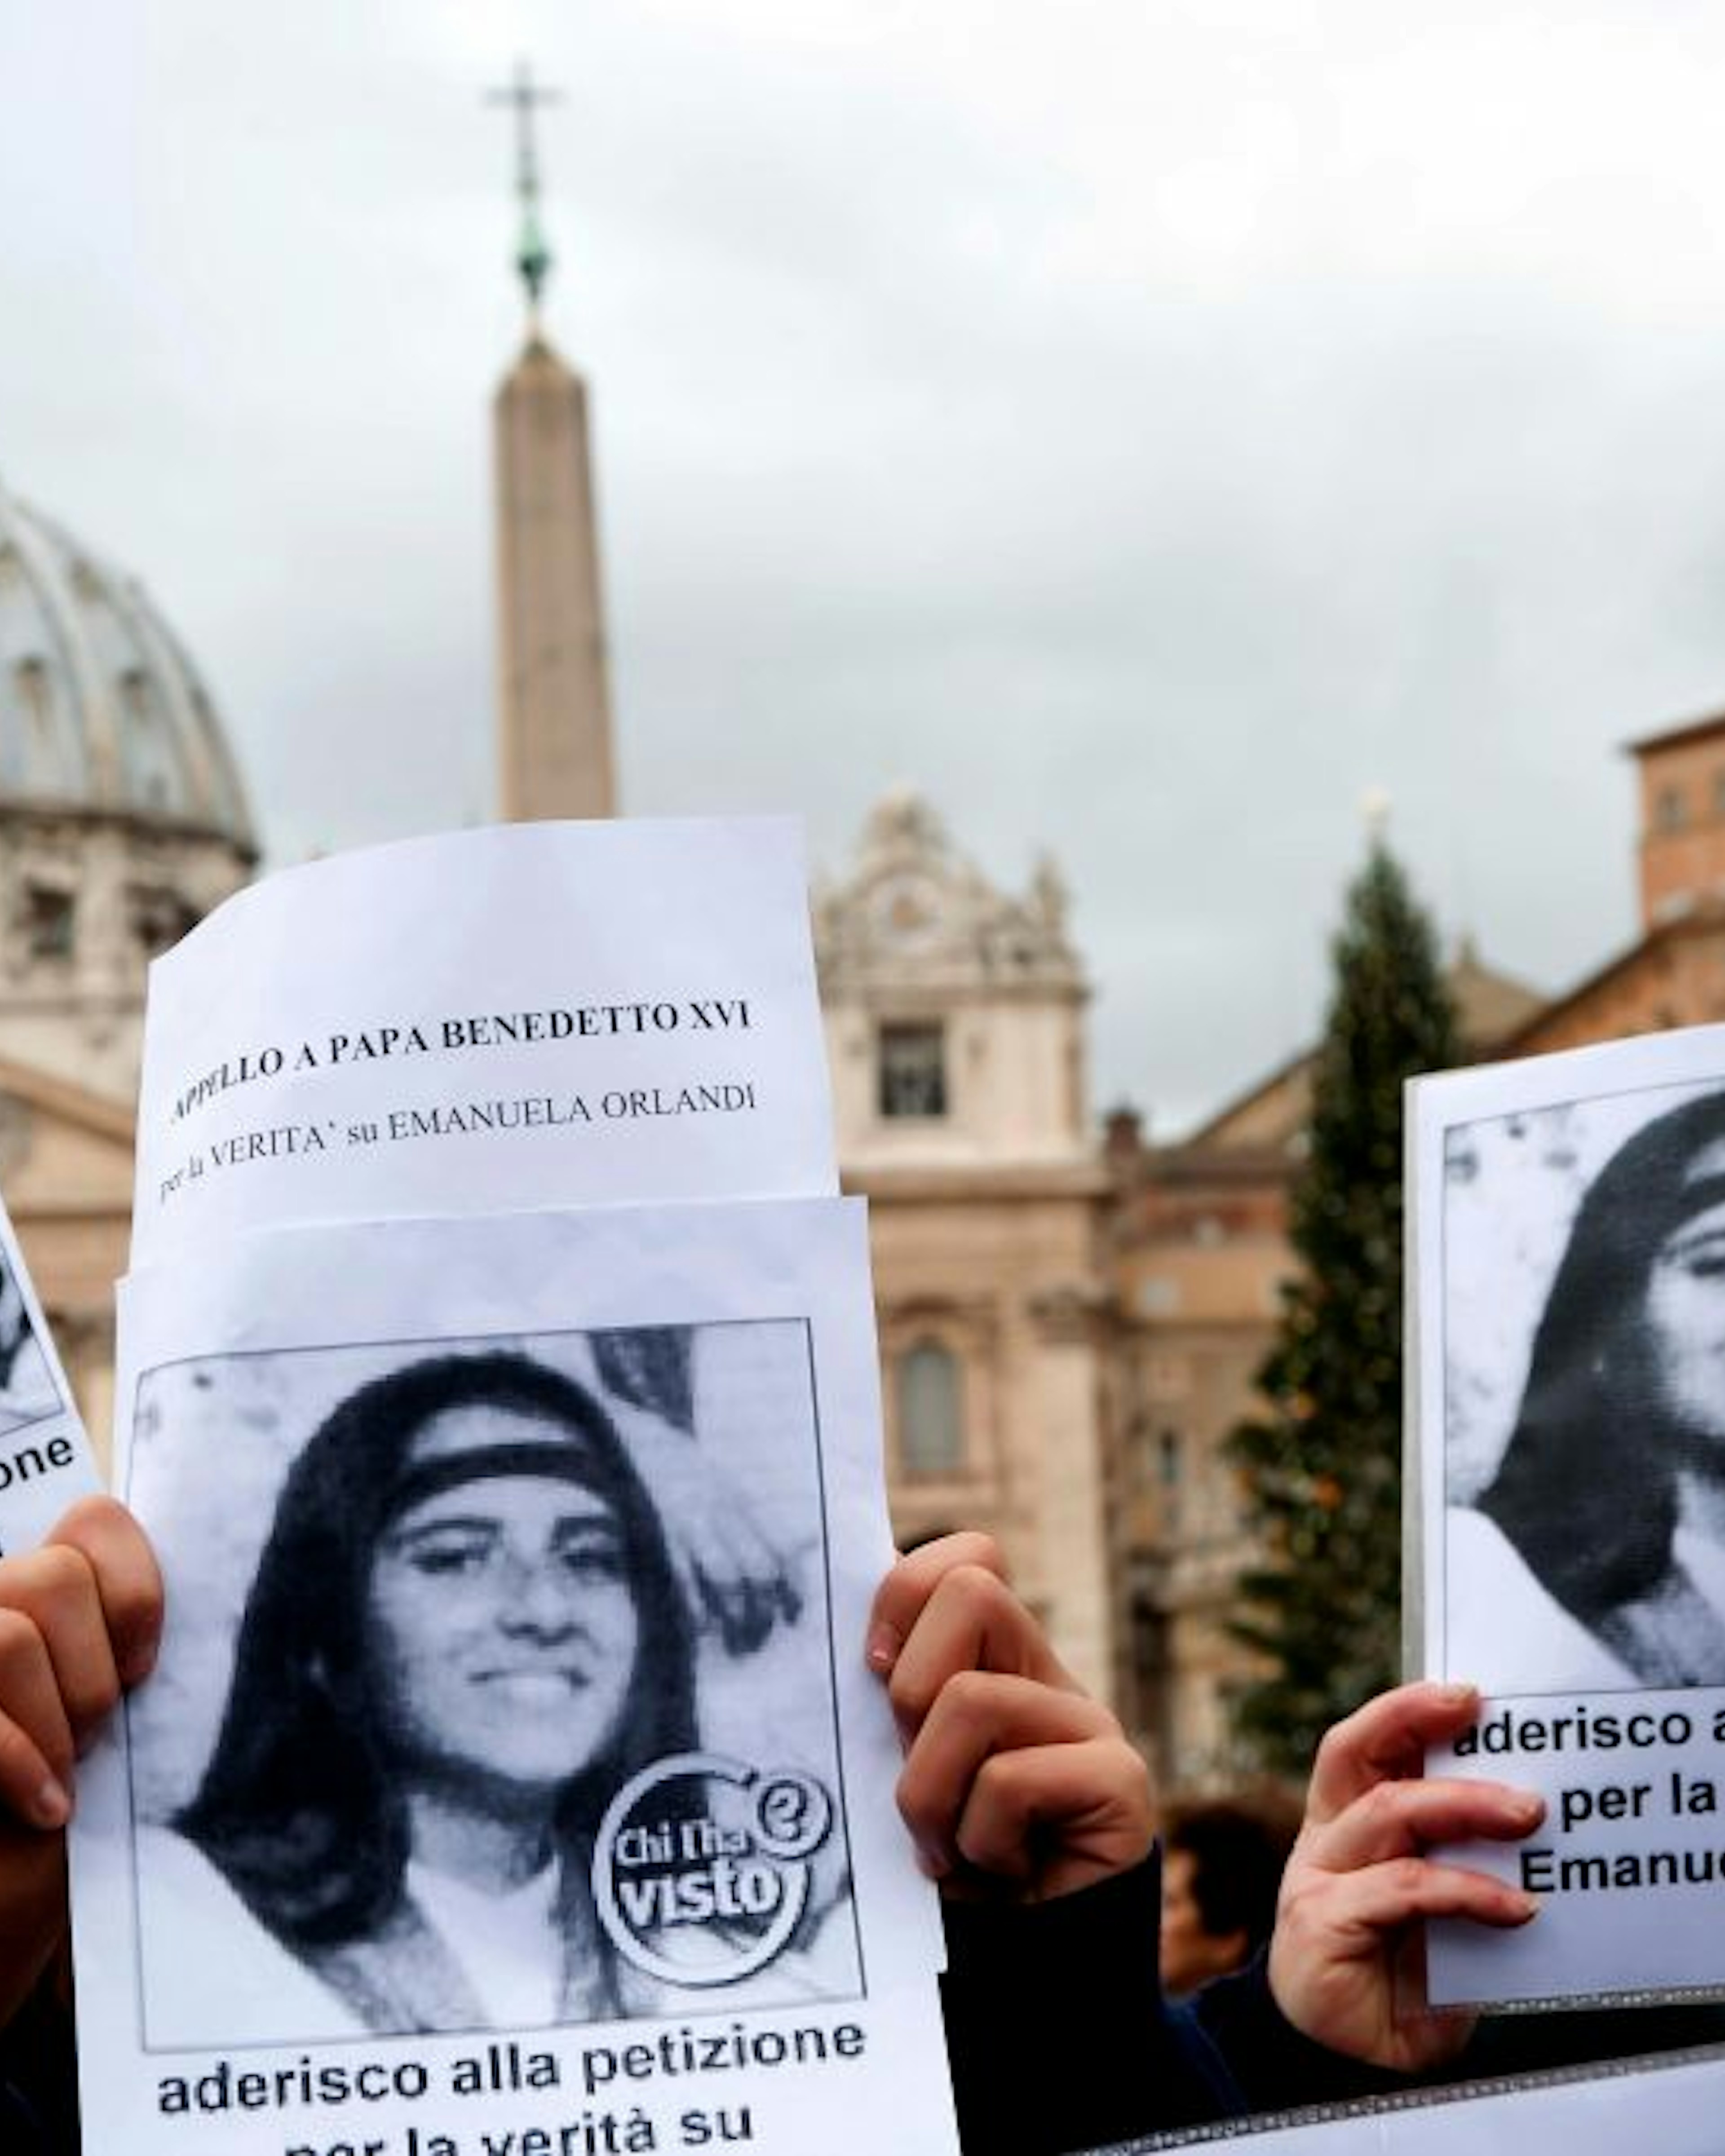 ROME, ITALY - DECEMBER 18: Demonstrators with Emanuela Orlandi's photo in the background St. Peter's Basilica during the Silent demonstration from Castel Sant'Angelo to St. Peter's Square to shed light on the kidnapping of Emanuela Orlandi who disappeared 29 years ago, and to recall the petition launched to Pope Benedict XVI to demand the truth, which has reached 40 thousand adhesions. The event was organised by Pietro Orlandi, Emanuela's brother.on December 18, 2011 in Rome, Italy. Emanuela Orlandi; daughter of a clerk of the pontifical prefecture, the girl, 15 years old, suddenly disappeared on June 22nd 1983 and she's never been found. (Photo by Stefano Montesi - Corbis/Corbis via Getty Images)